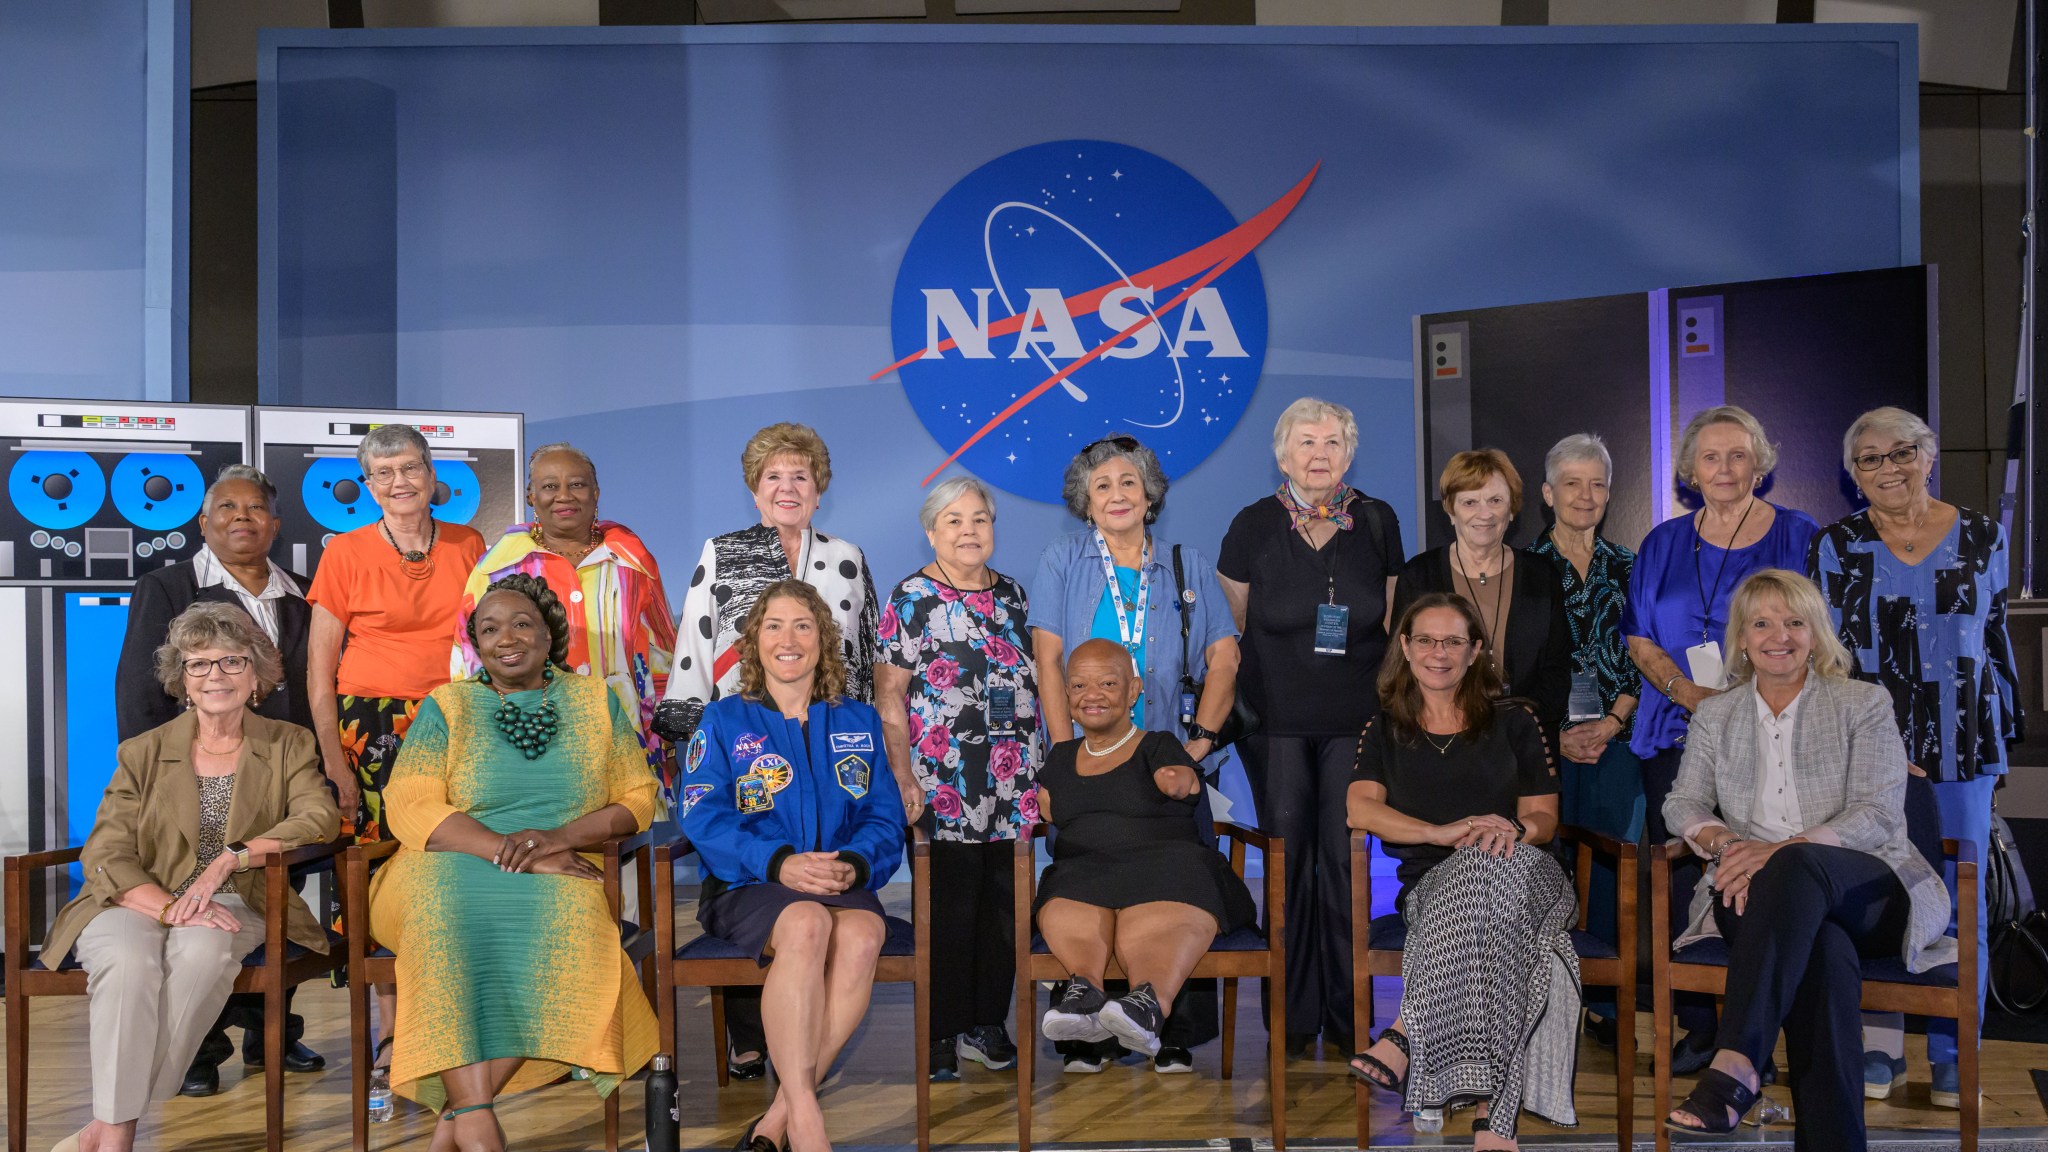 A group of women pose for a photo in front of a large NASA logo backdrop. The group includes women of various ages, some seated and some standing. They are dressed in a variety of outfits, from professional attire to casual wear.